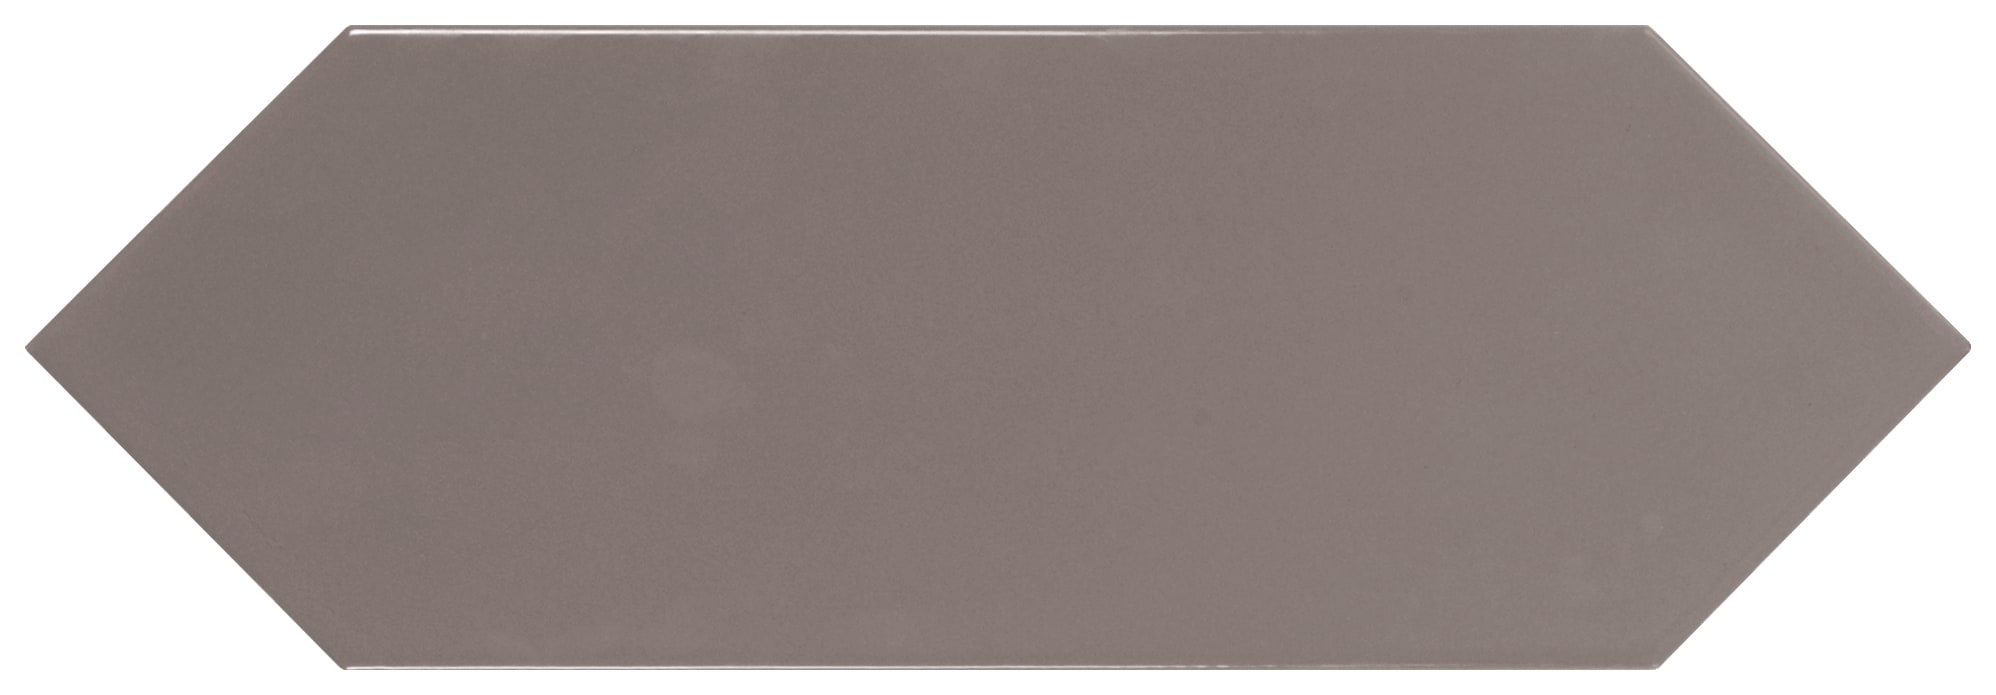 Wickes Boutique Clover Charcoal Gloss Ceramic Wall Tile